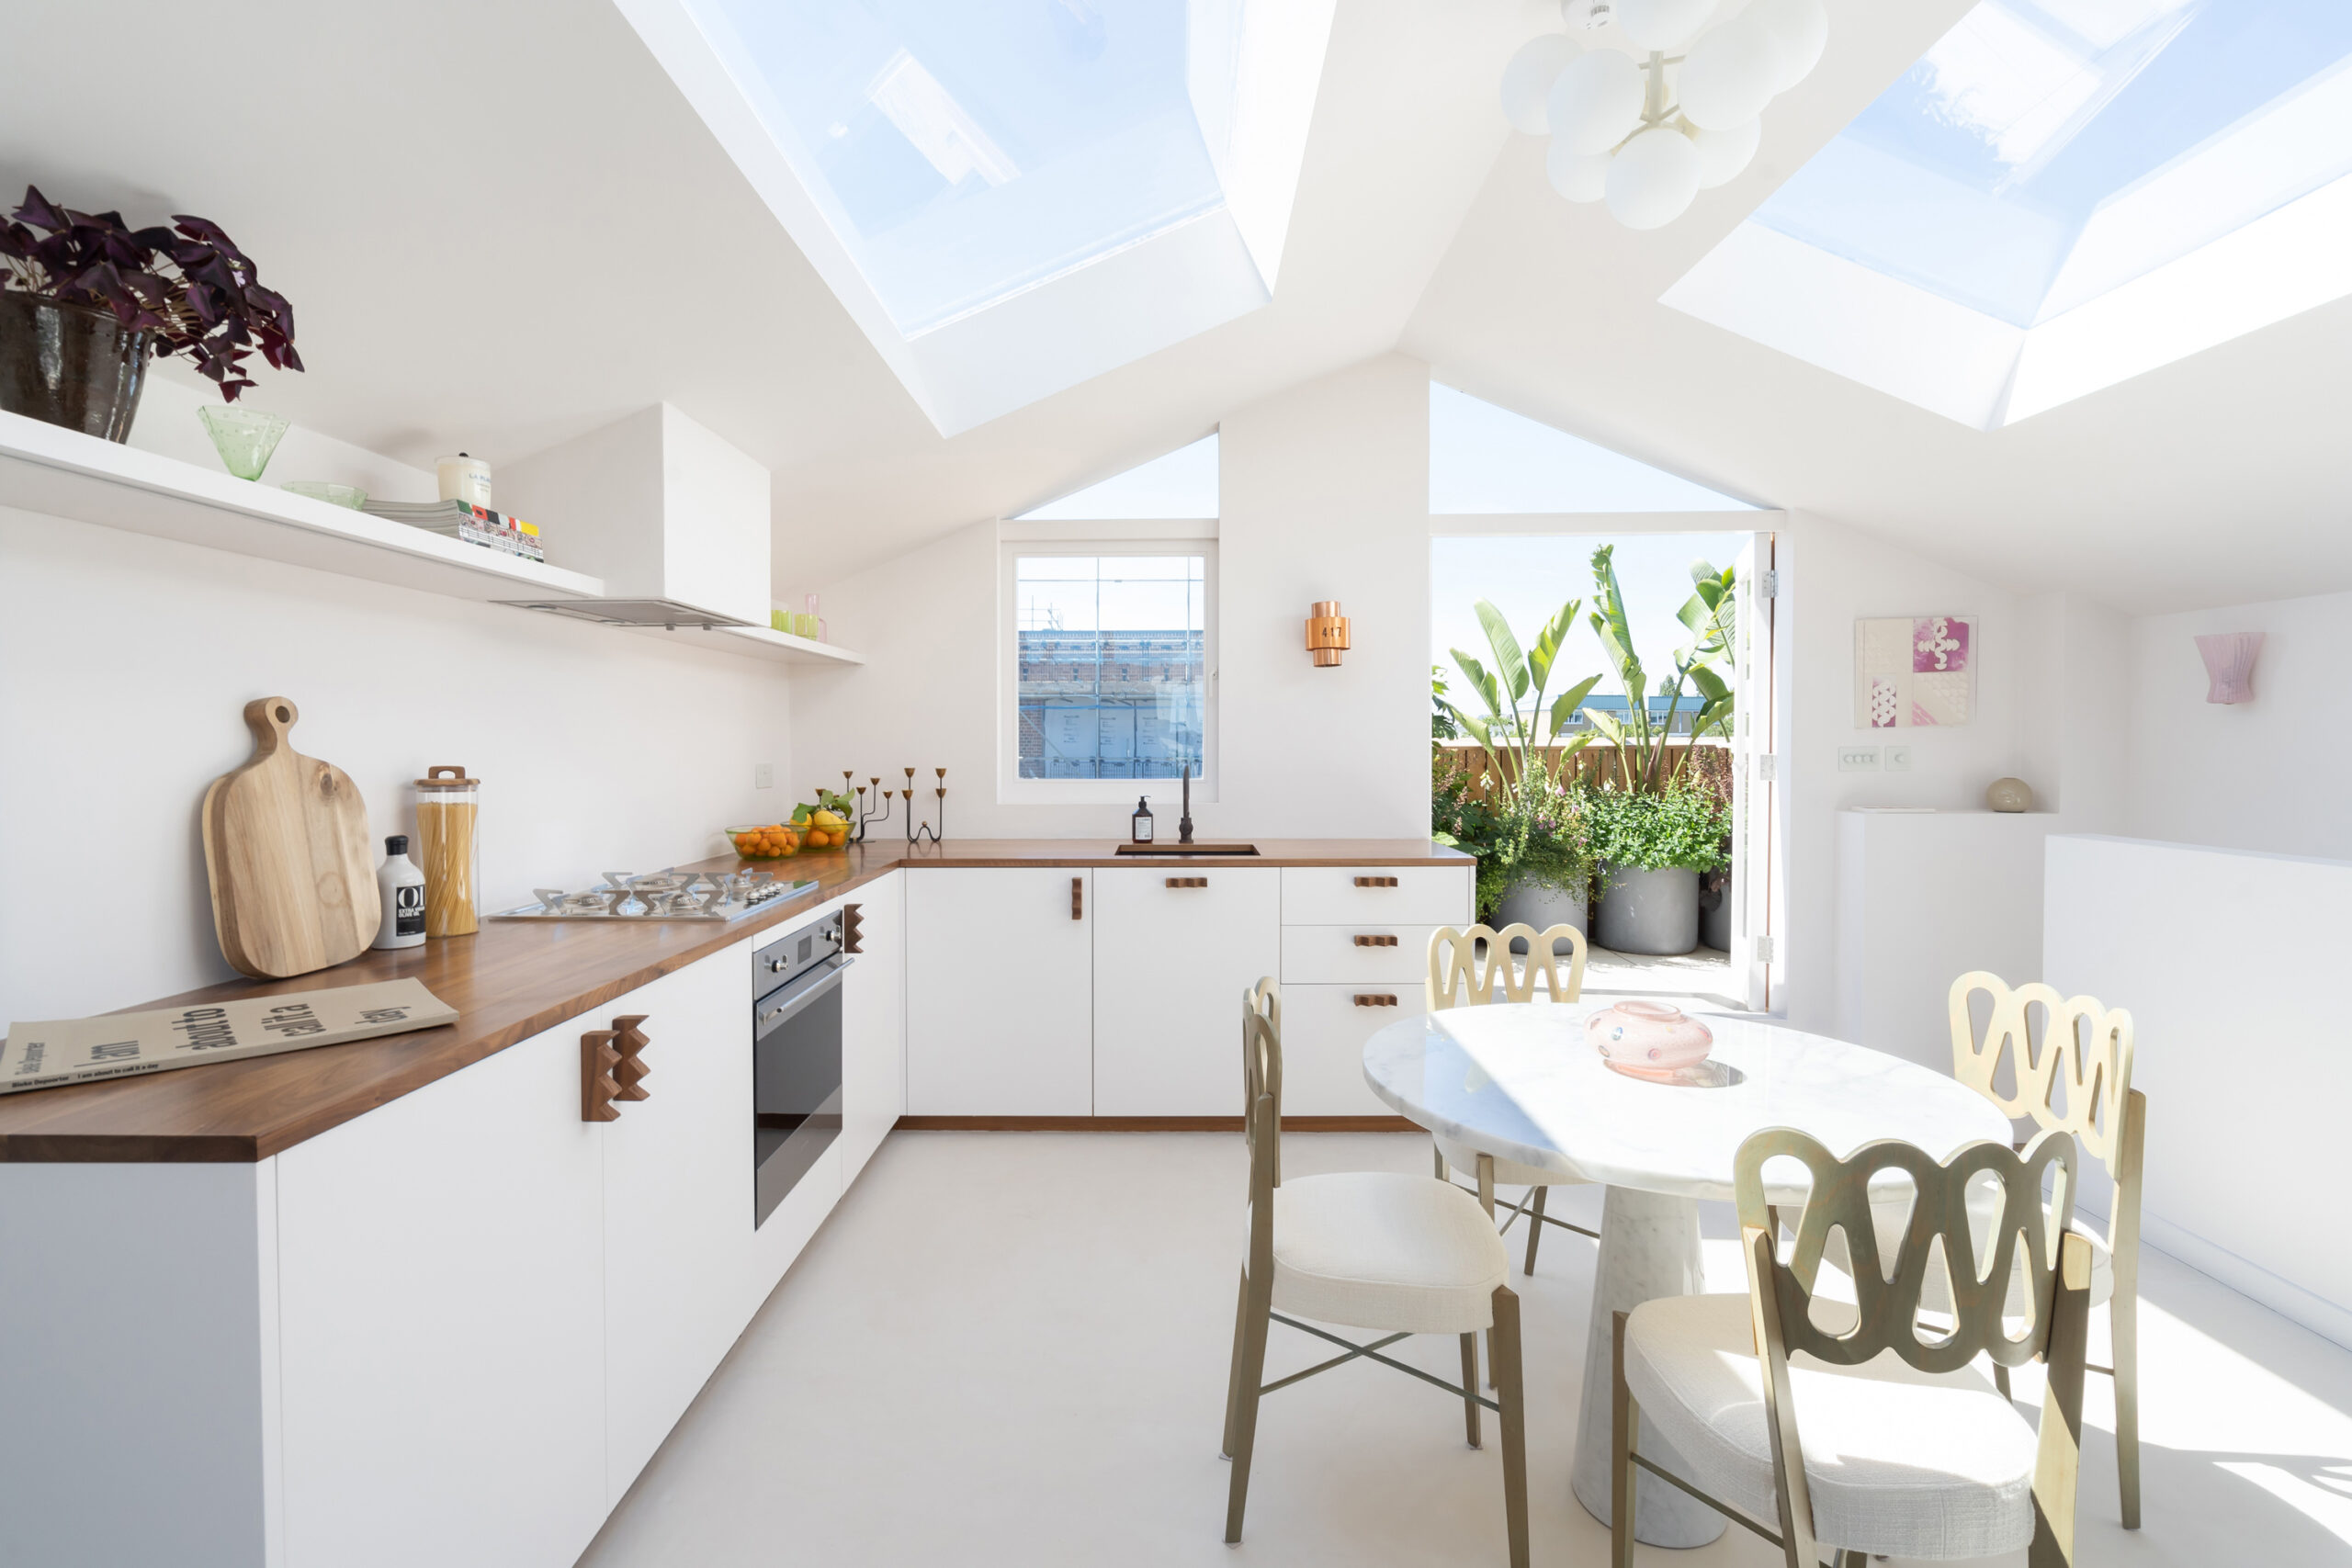 For Sale: Golborne Road North Kensington W10 top-floor kitchen with minimalist furniture and skylights